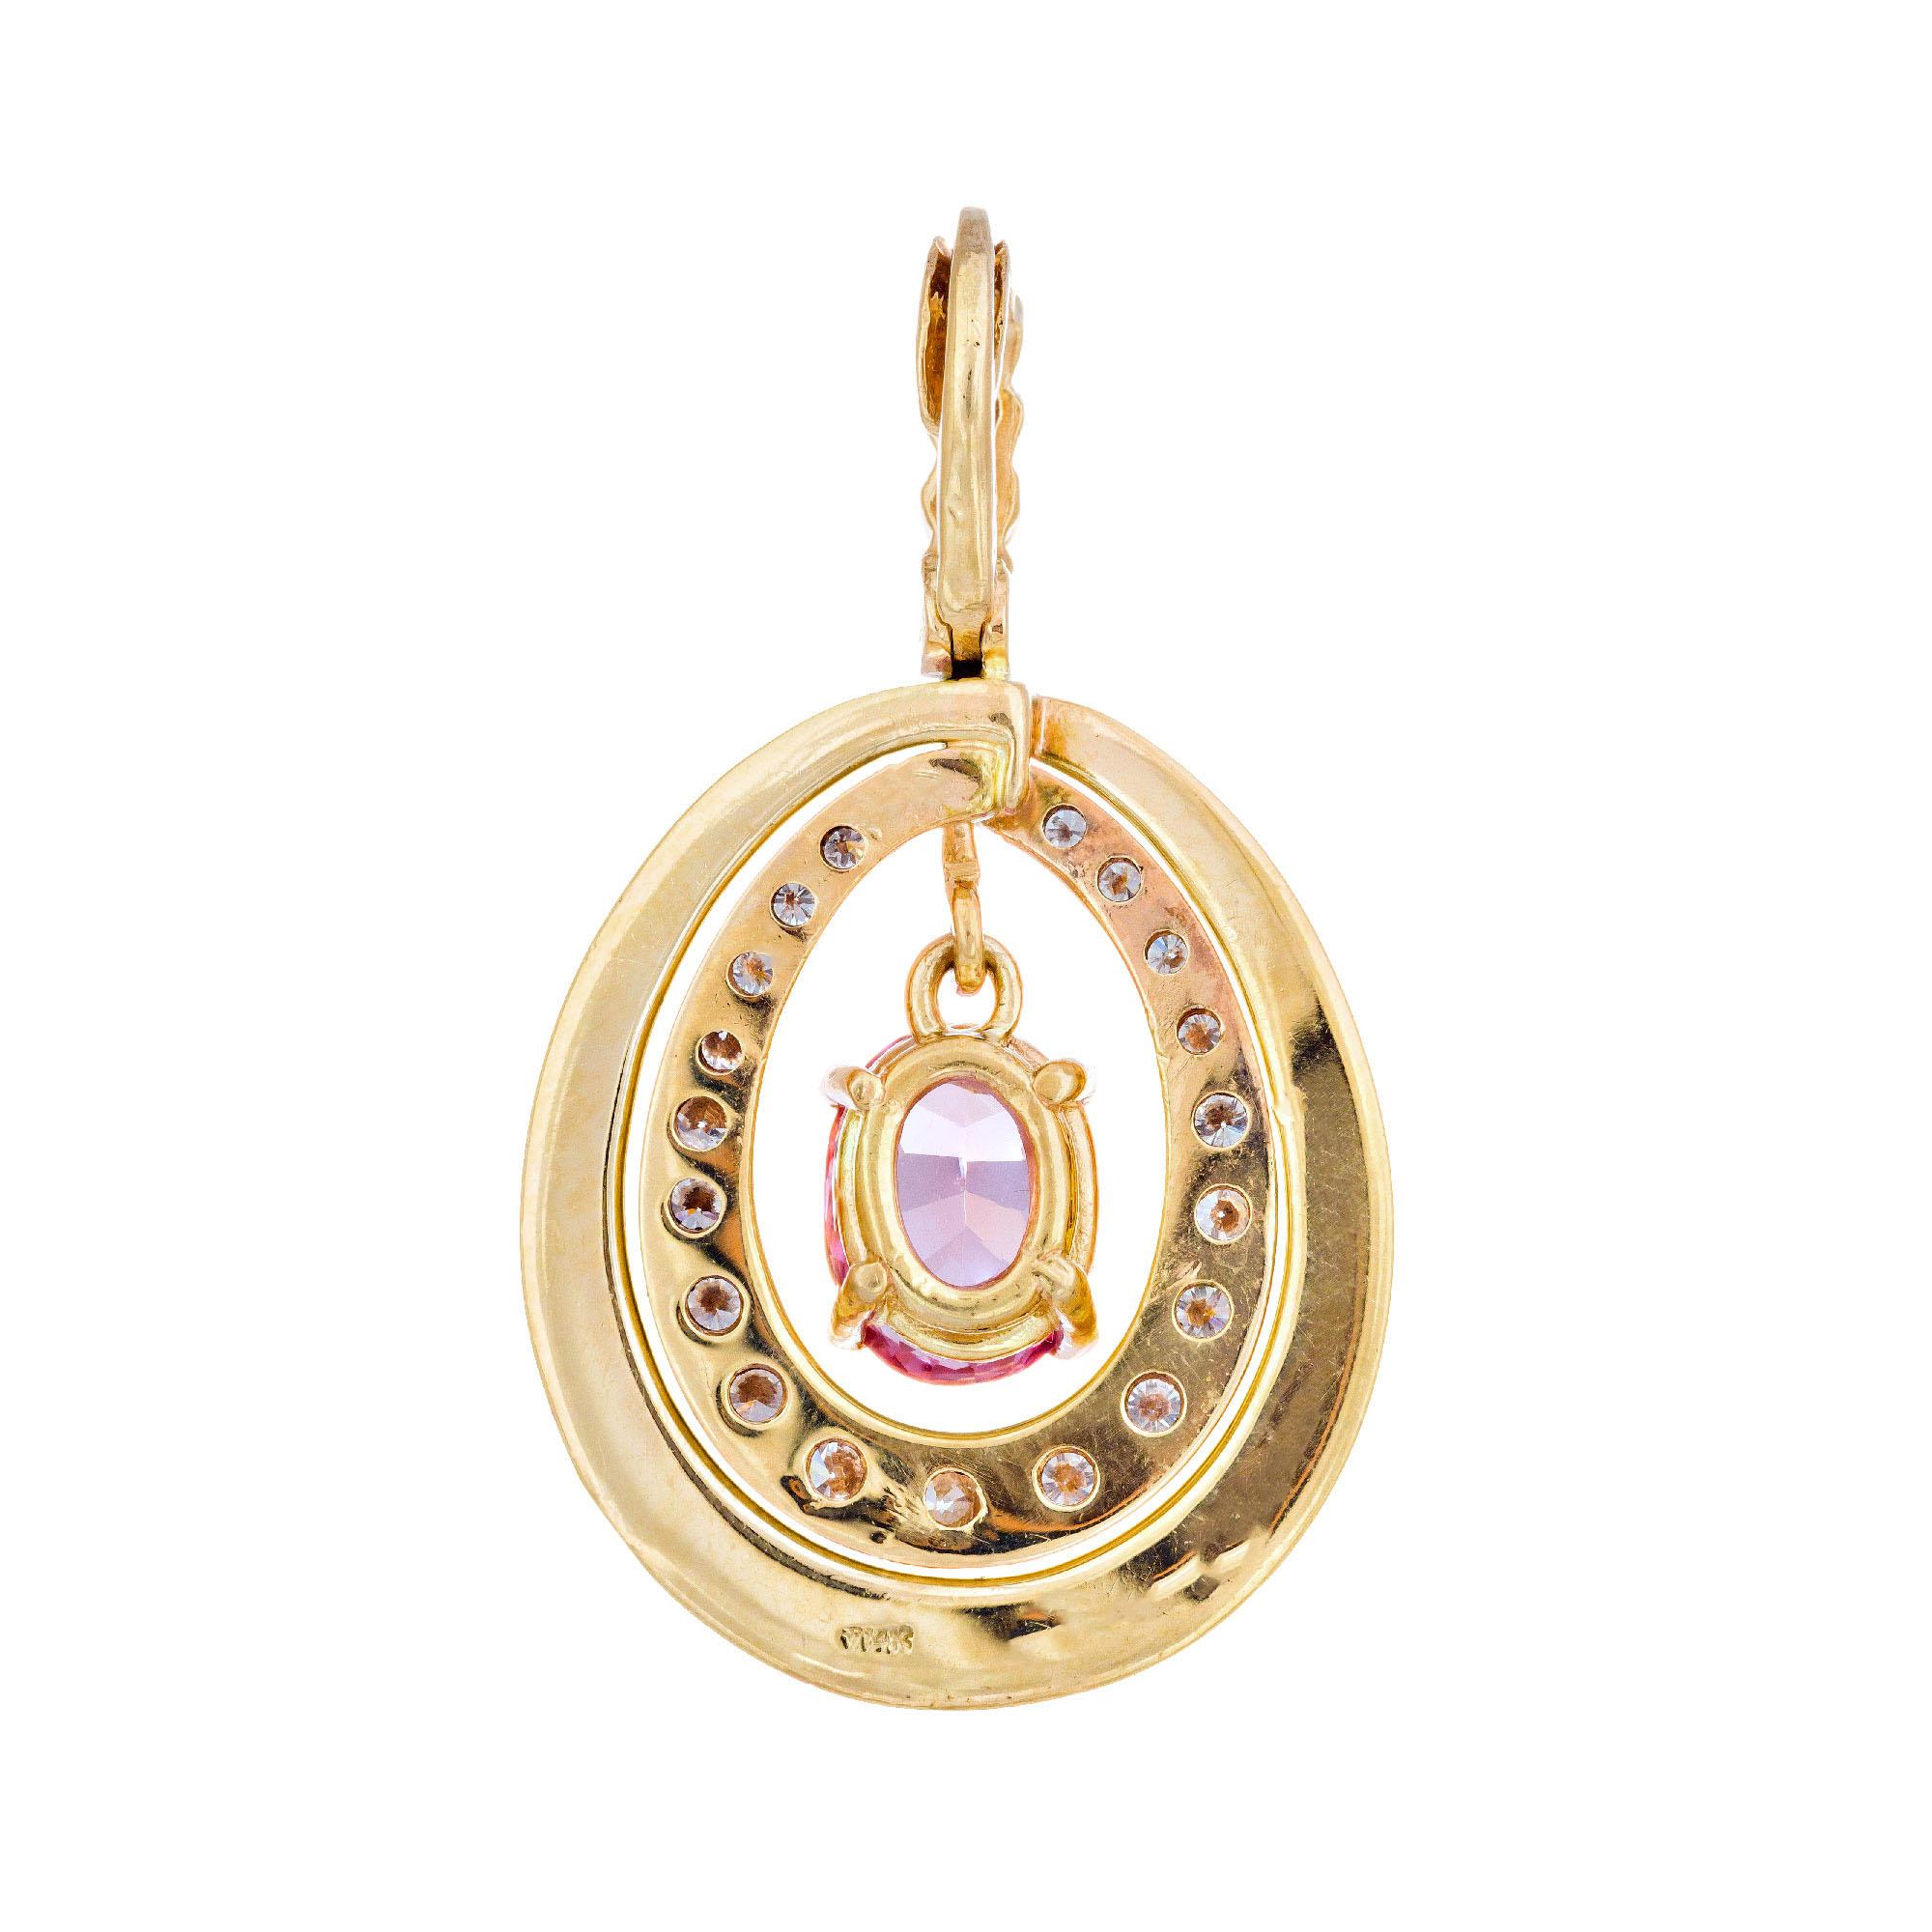 Oval Cut GIA Certified 1.50 Carat Pink Spinel Diamond Yellow Gold Pendant For Sale